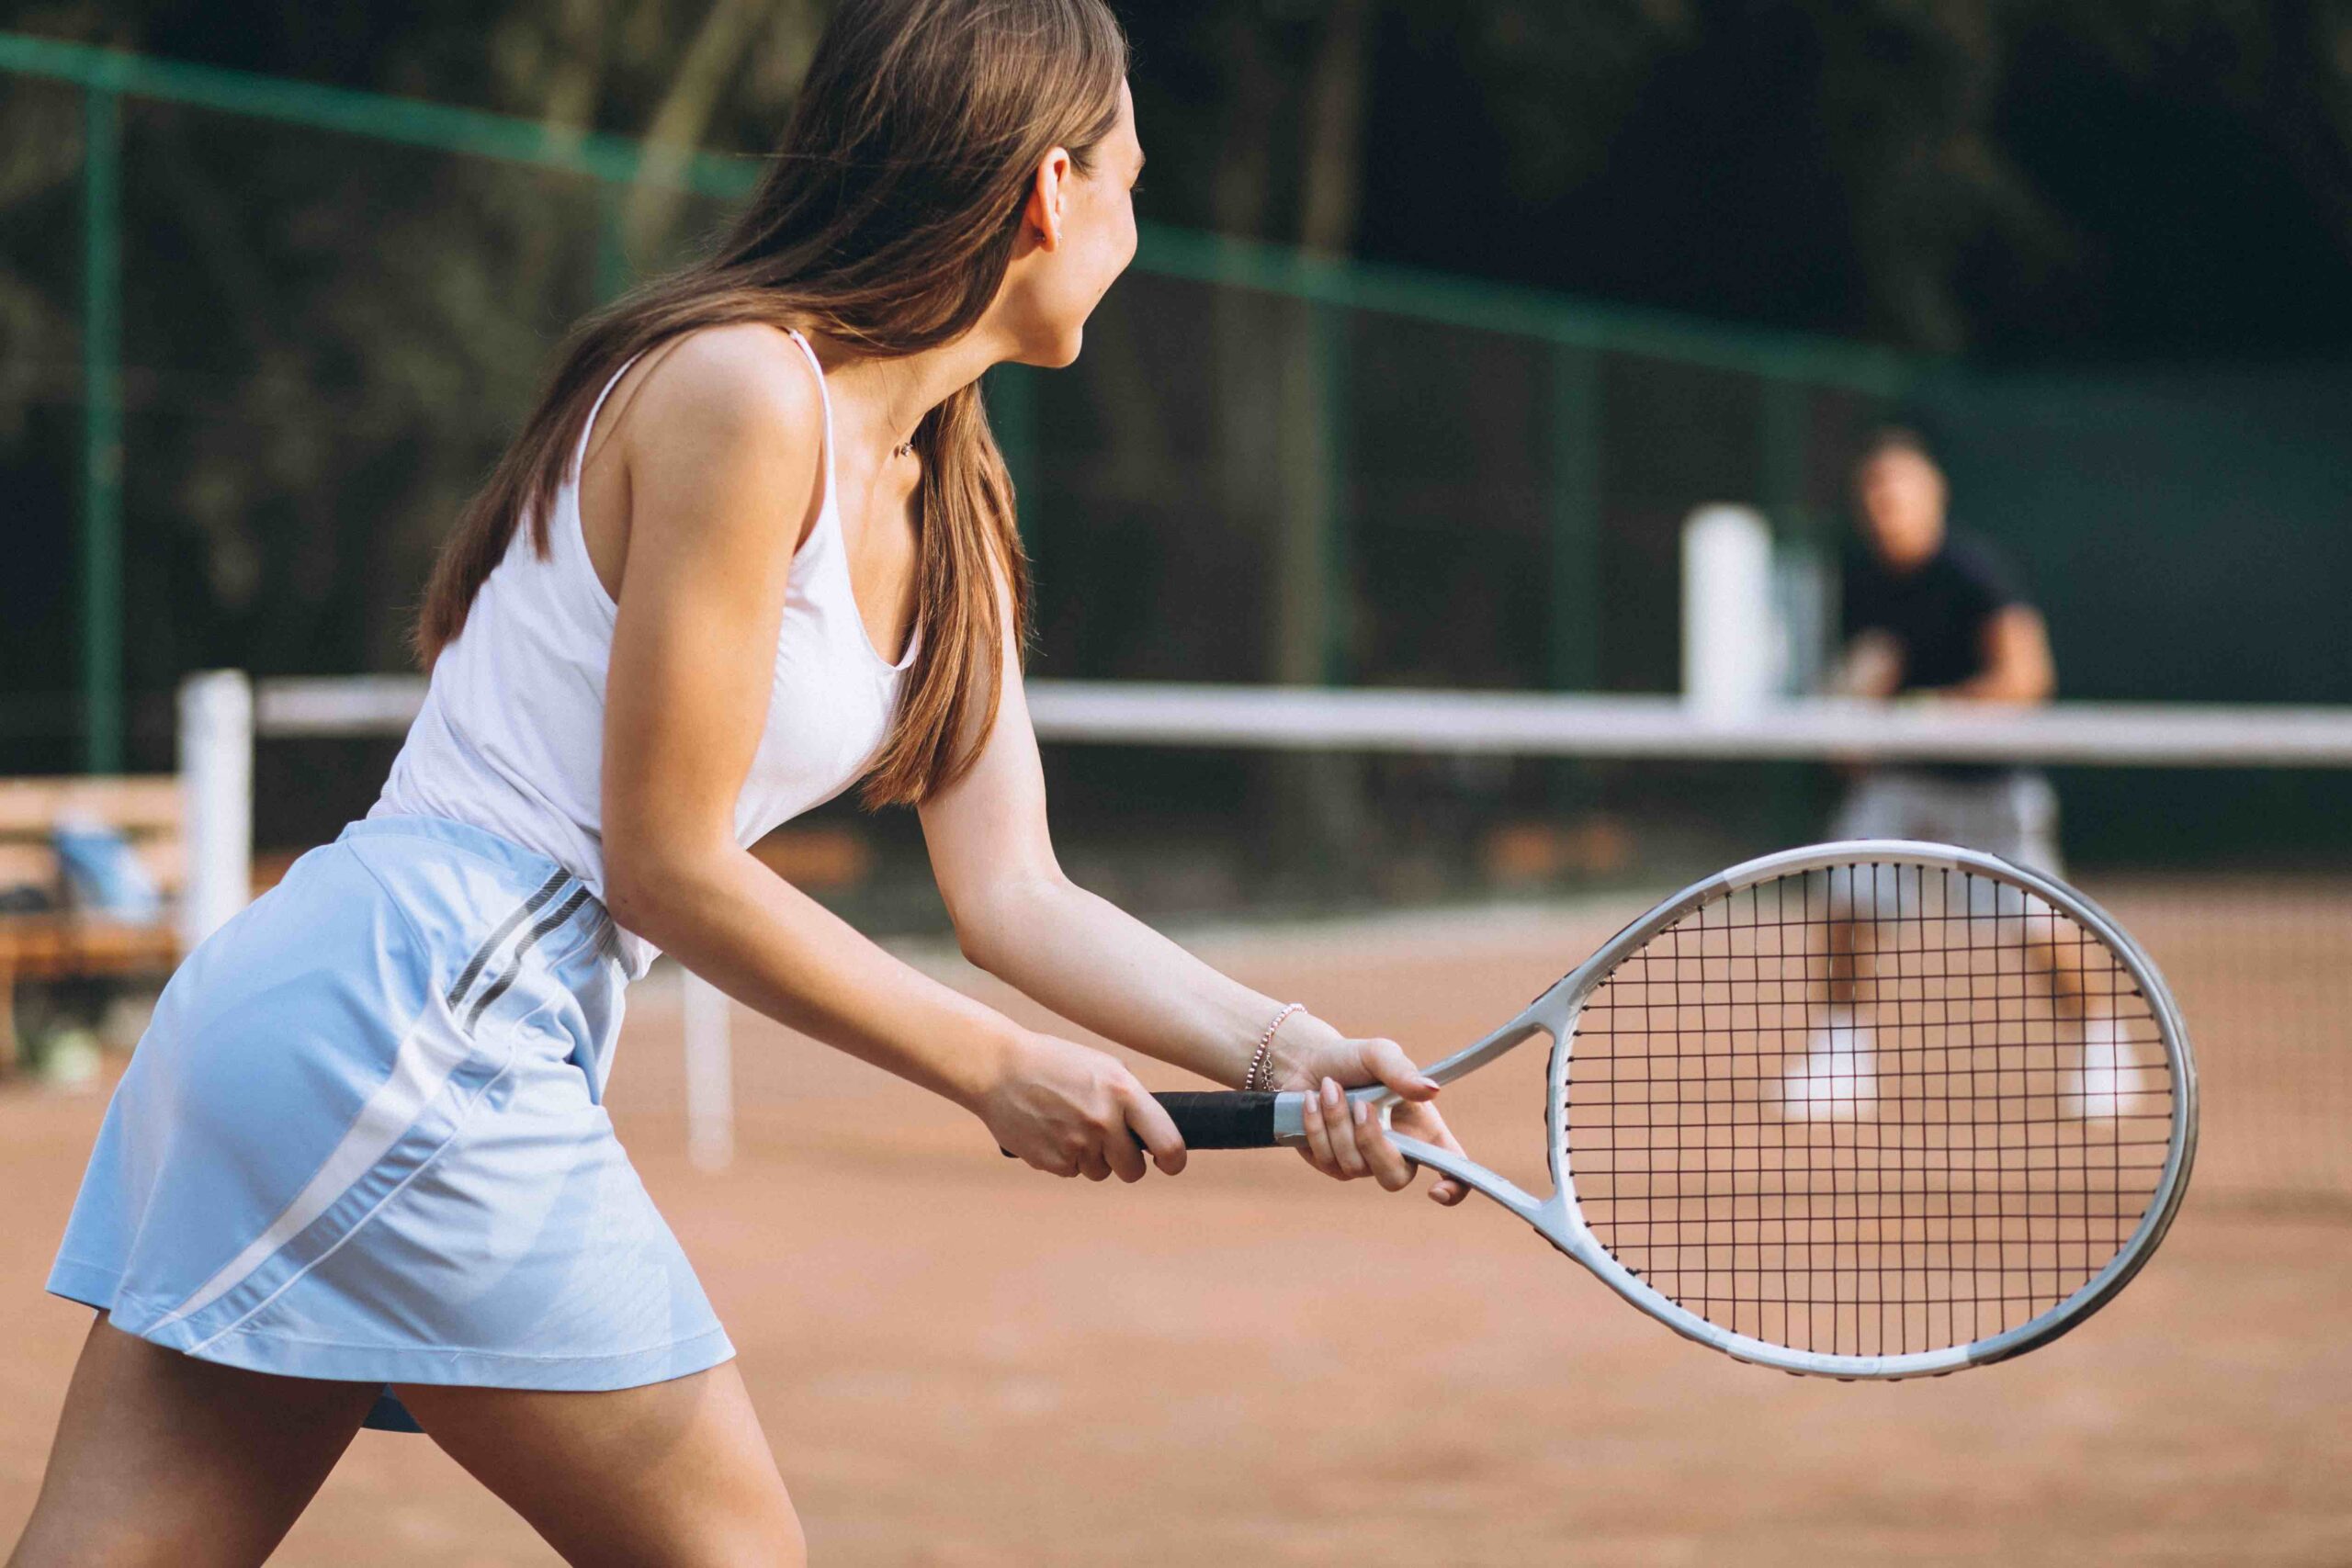 Playing sports can lower your risk of breast cancer (tennis) 